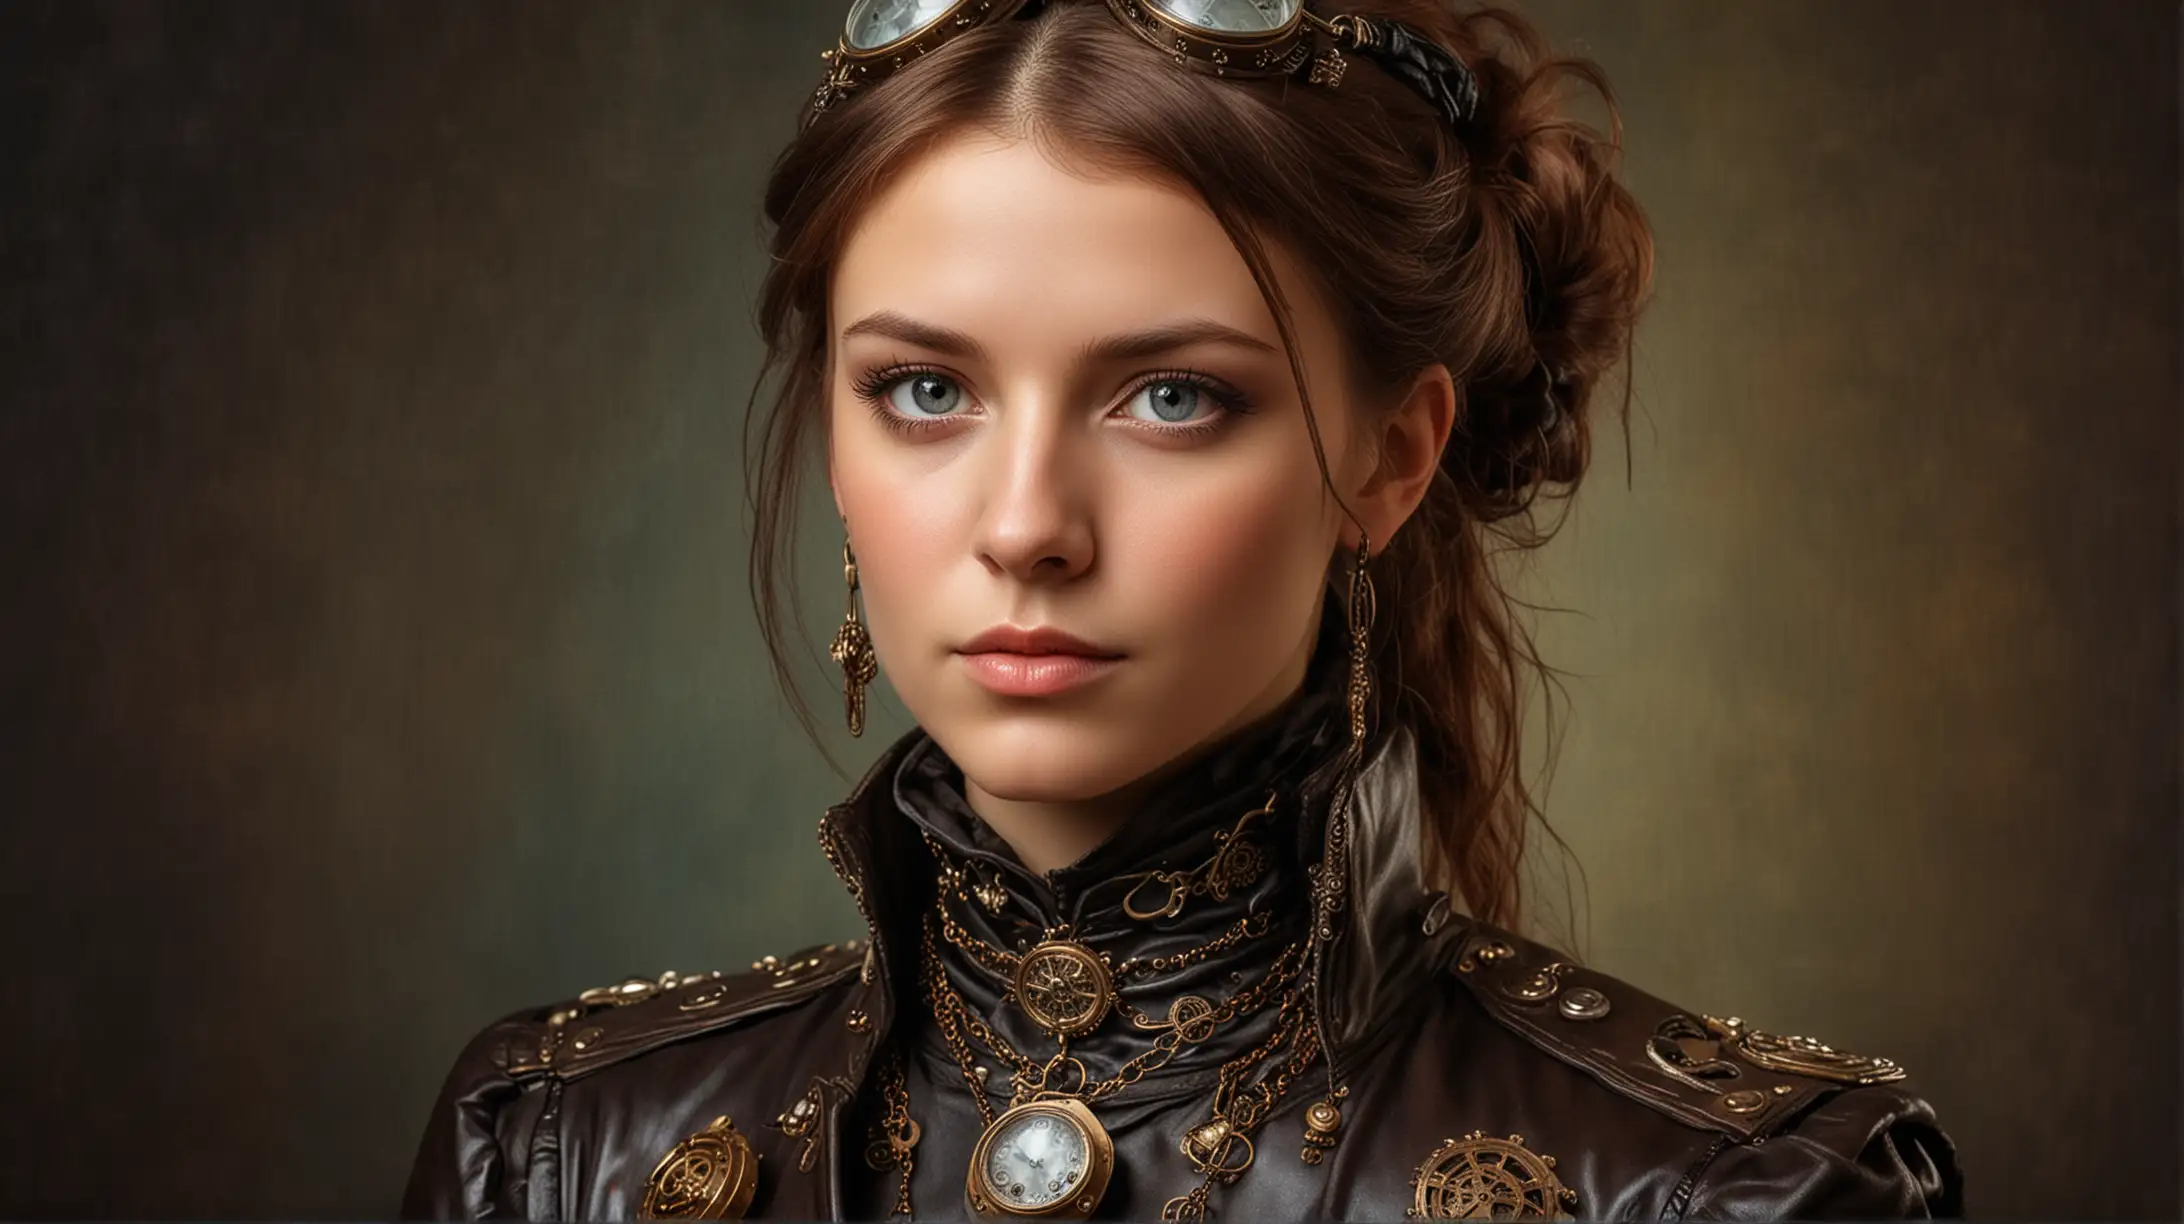 Portrait of a Young Steampunk Noble Woman in Leather Suit and Jewelry